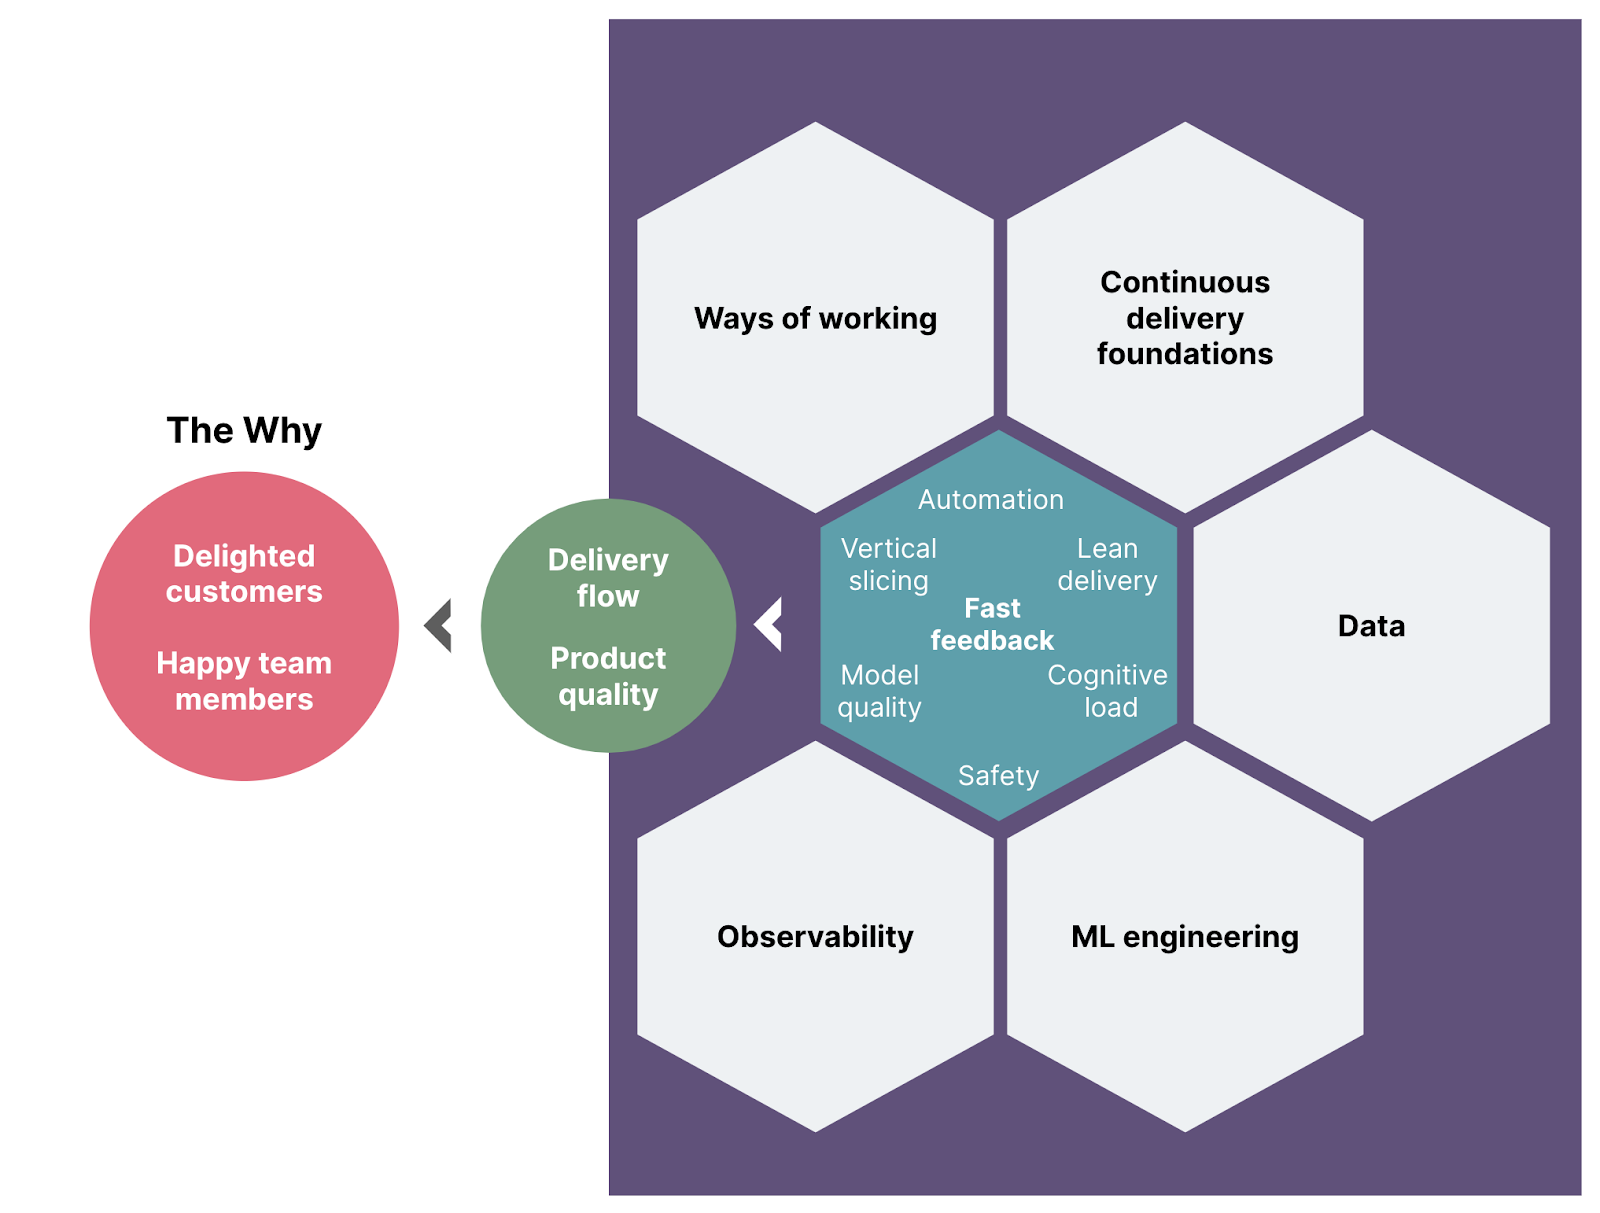 Figure 2: Aligning practices closely to MLOps principles can improve a team’s delivery flow and product quality, and ultimately deliver on an organization’s ‘Why’. From ways of working, continuous delivery foundations, data, ML engineering, observability. With fast feedback at the centre, including practices in vertical slicing, automation, lean delivery, cognitive load, safety, model quality. To practices in delivery flow and product quality. Which feeds into the why : delighted customers and happy team members.